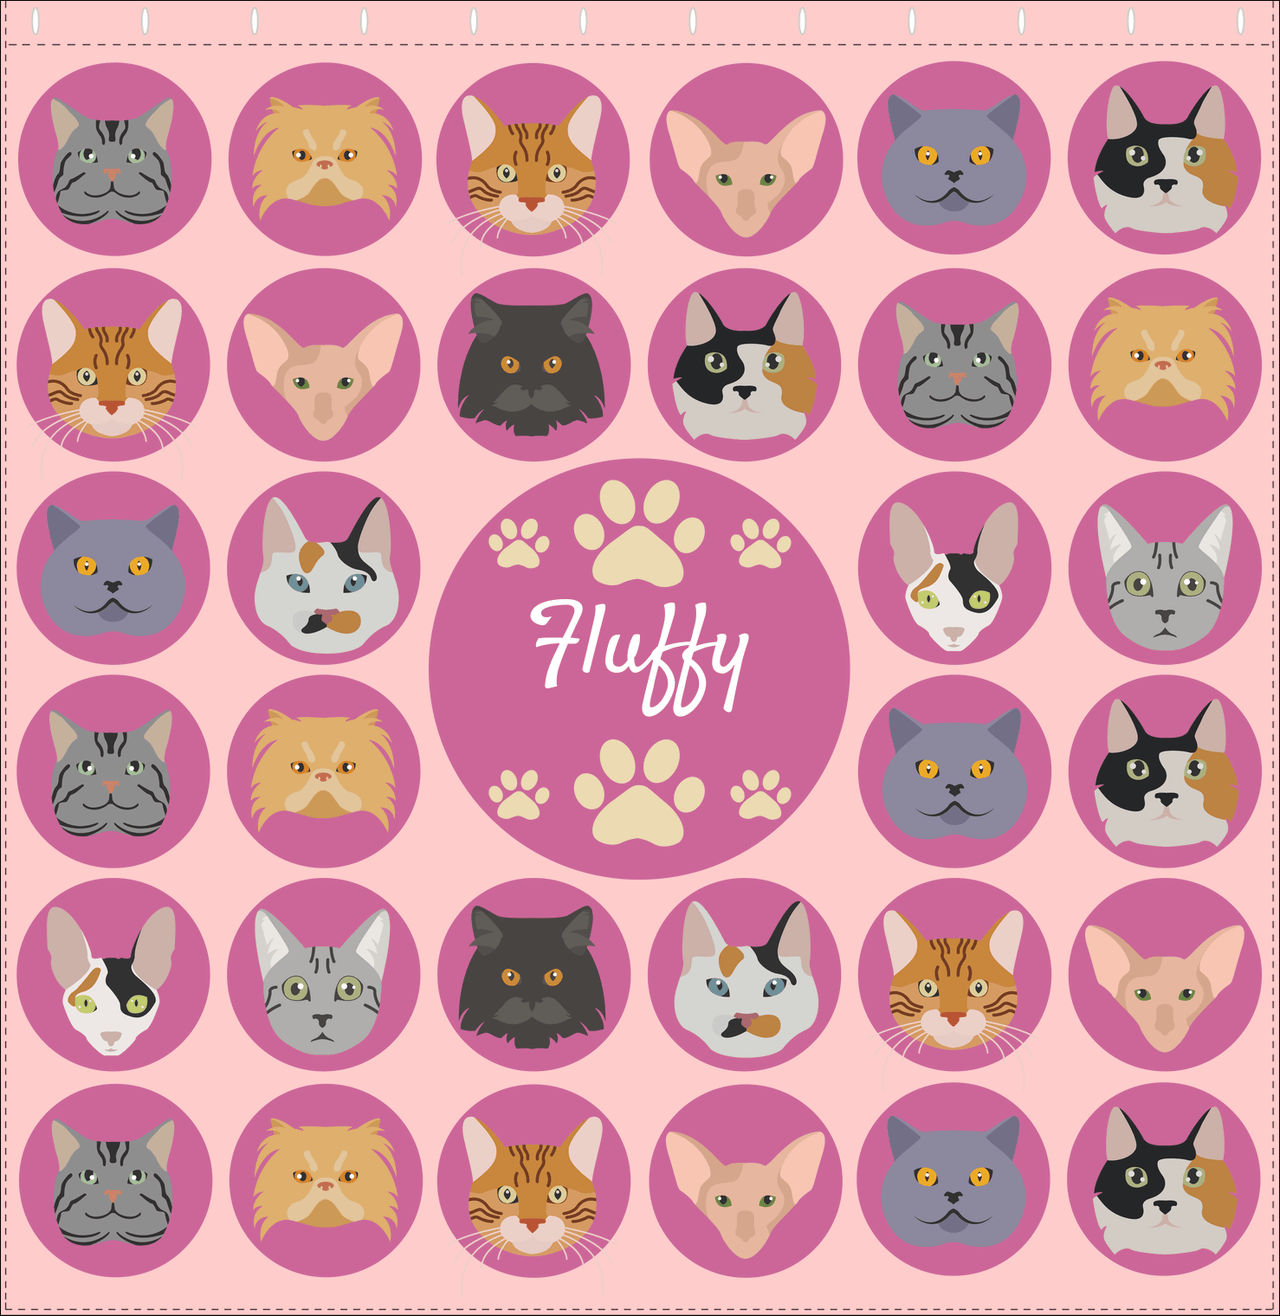 Personalized Cats Shower Curtain I - Circle Cats - Pink Background - Decorate View